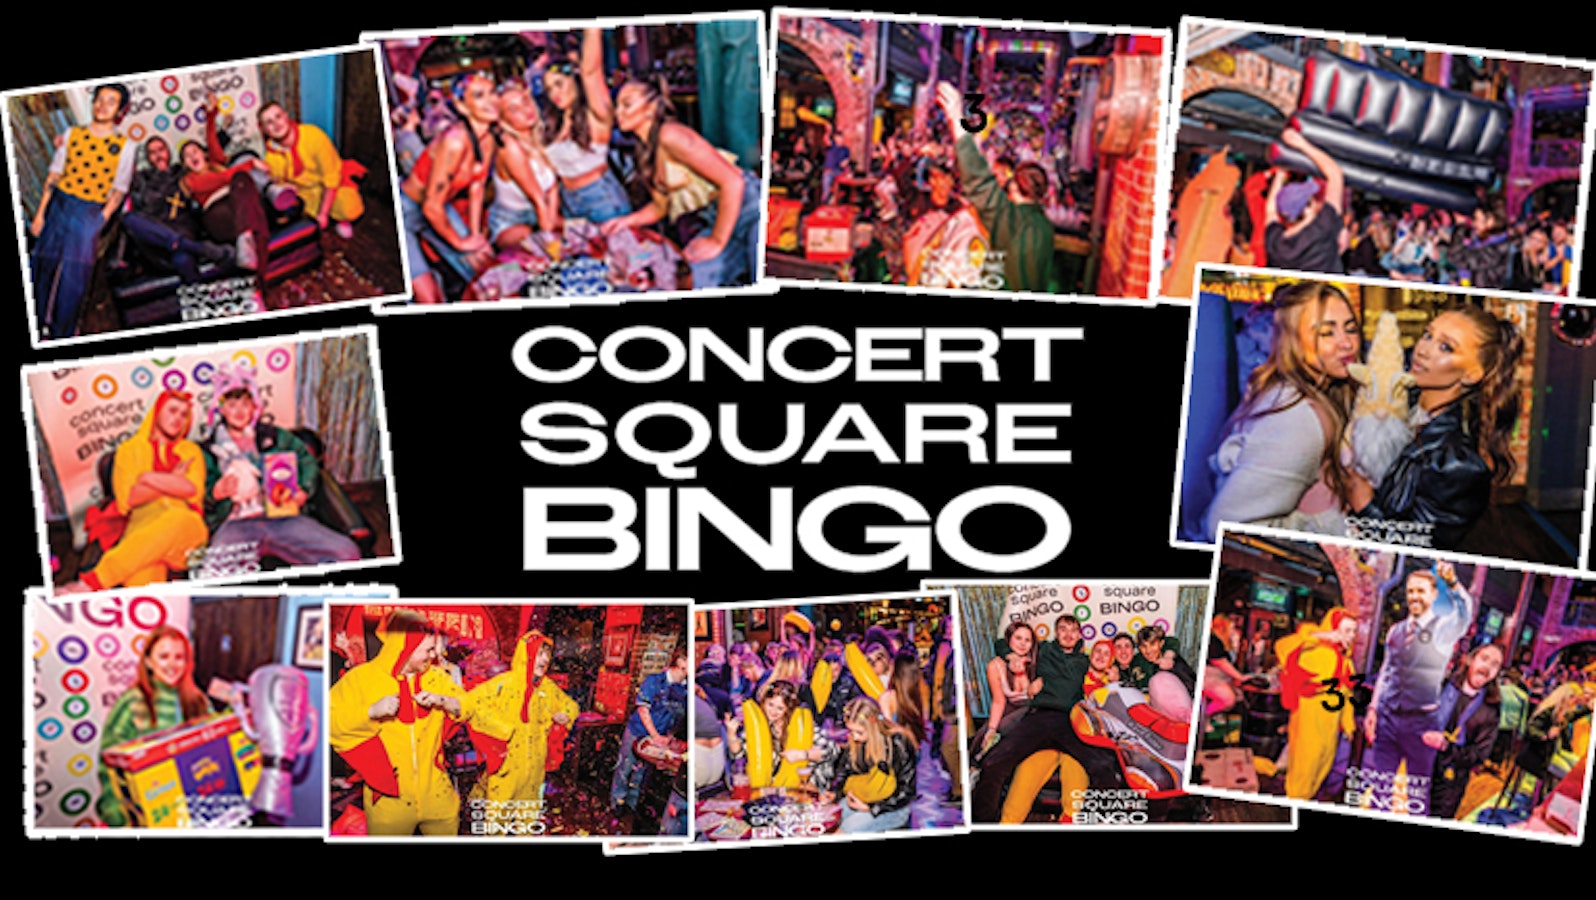 CONCERT SQUARE BINGO at Einstein, Concert Square – WALK AWAY WITH £200 / WIN DRINKS / WIN BIG PRIZES / WIN STUPID PRIZES